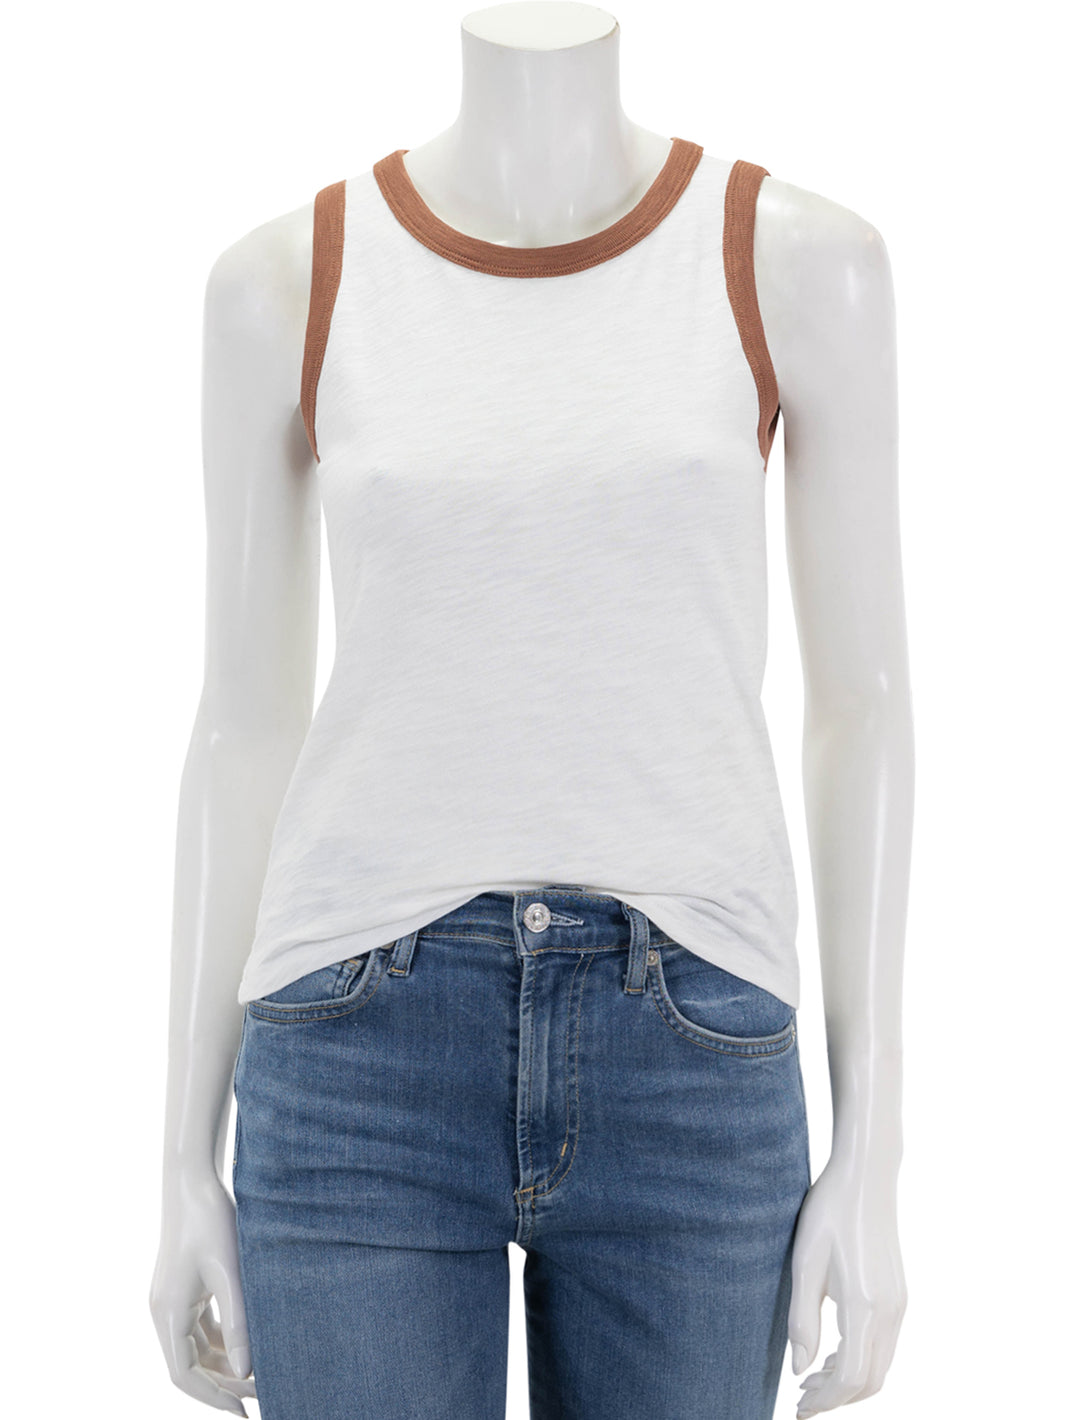 Front view of Lilla P.'s colorblock tank in white and burnt sienna.